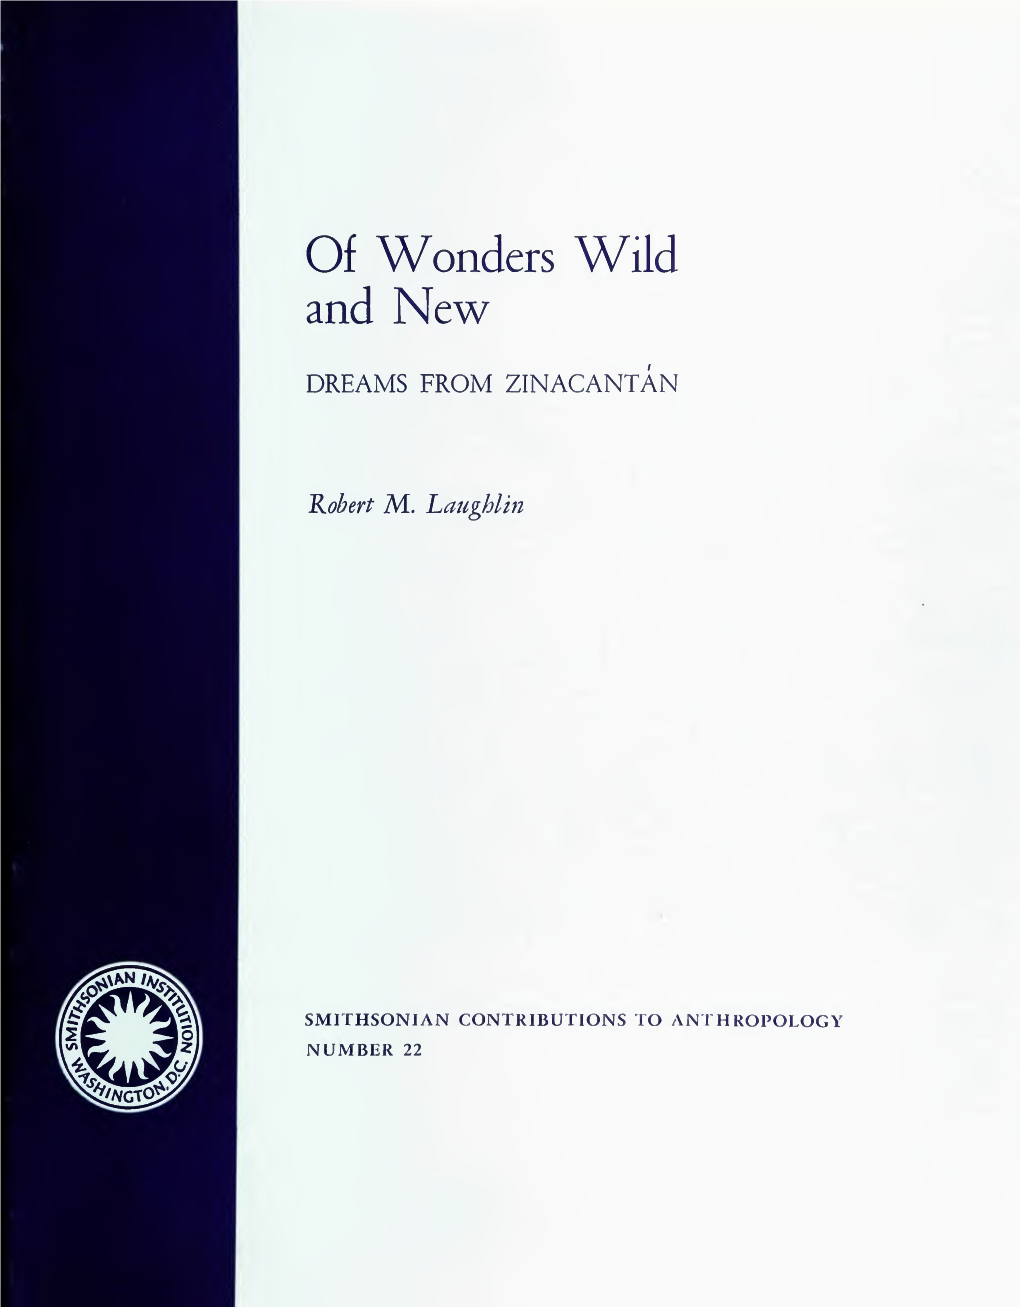 Of Wonders Wild and New